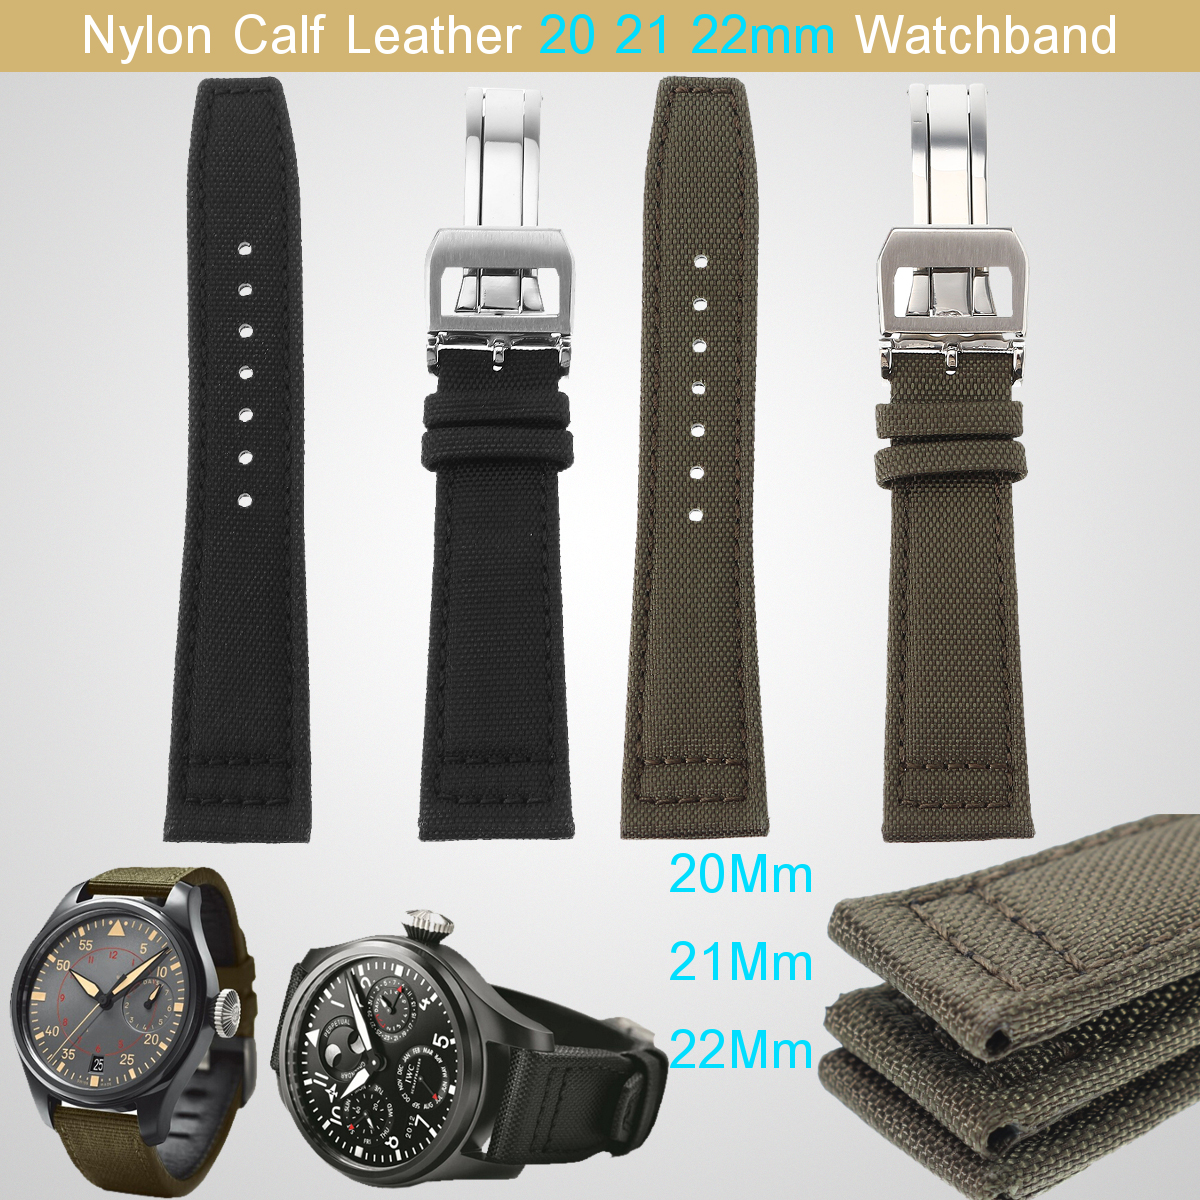 20mm-21mm-22mm-Nylon-Calf-Leather-Wristband-Watch-Band-Smart-Watch-Strap-Replacement-1644158-2